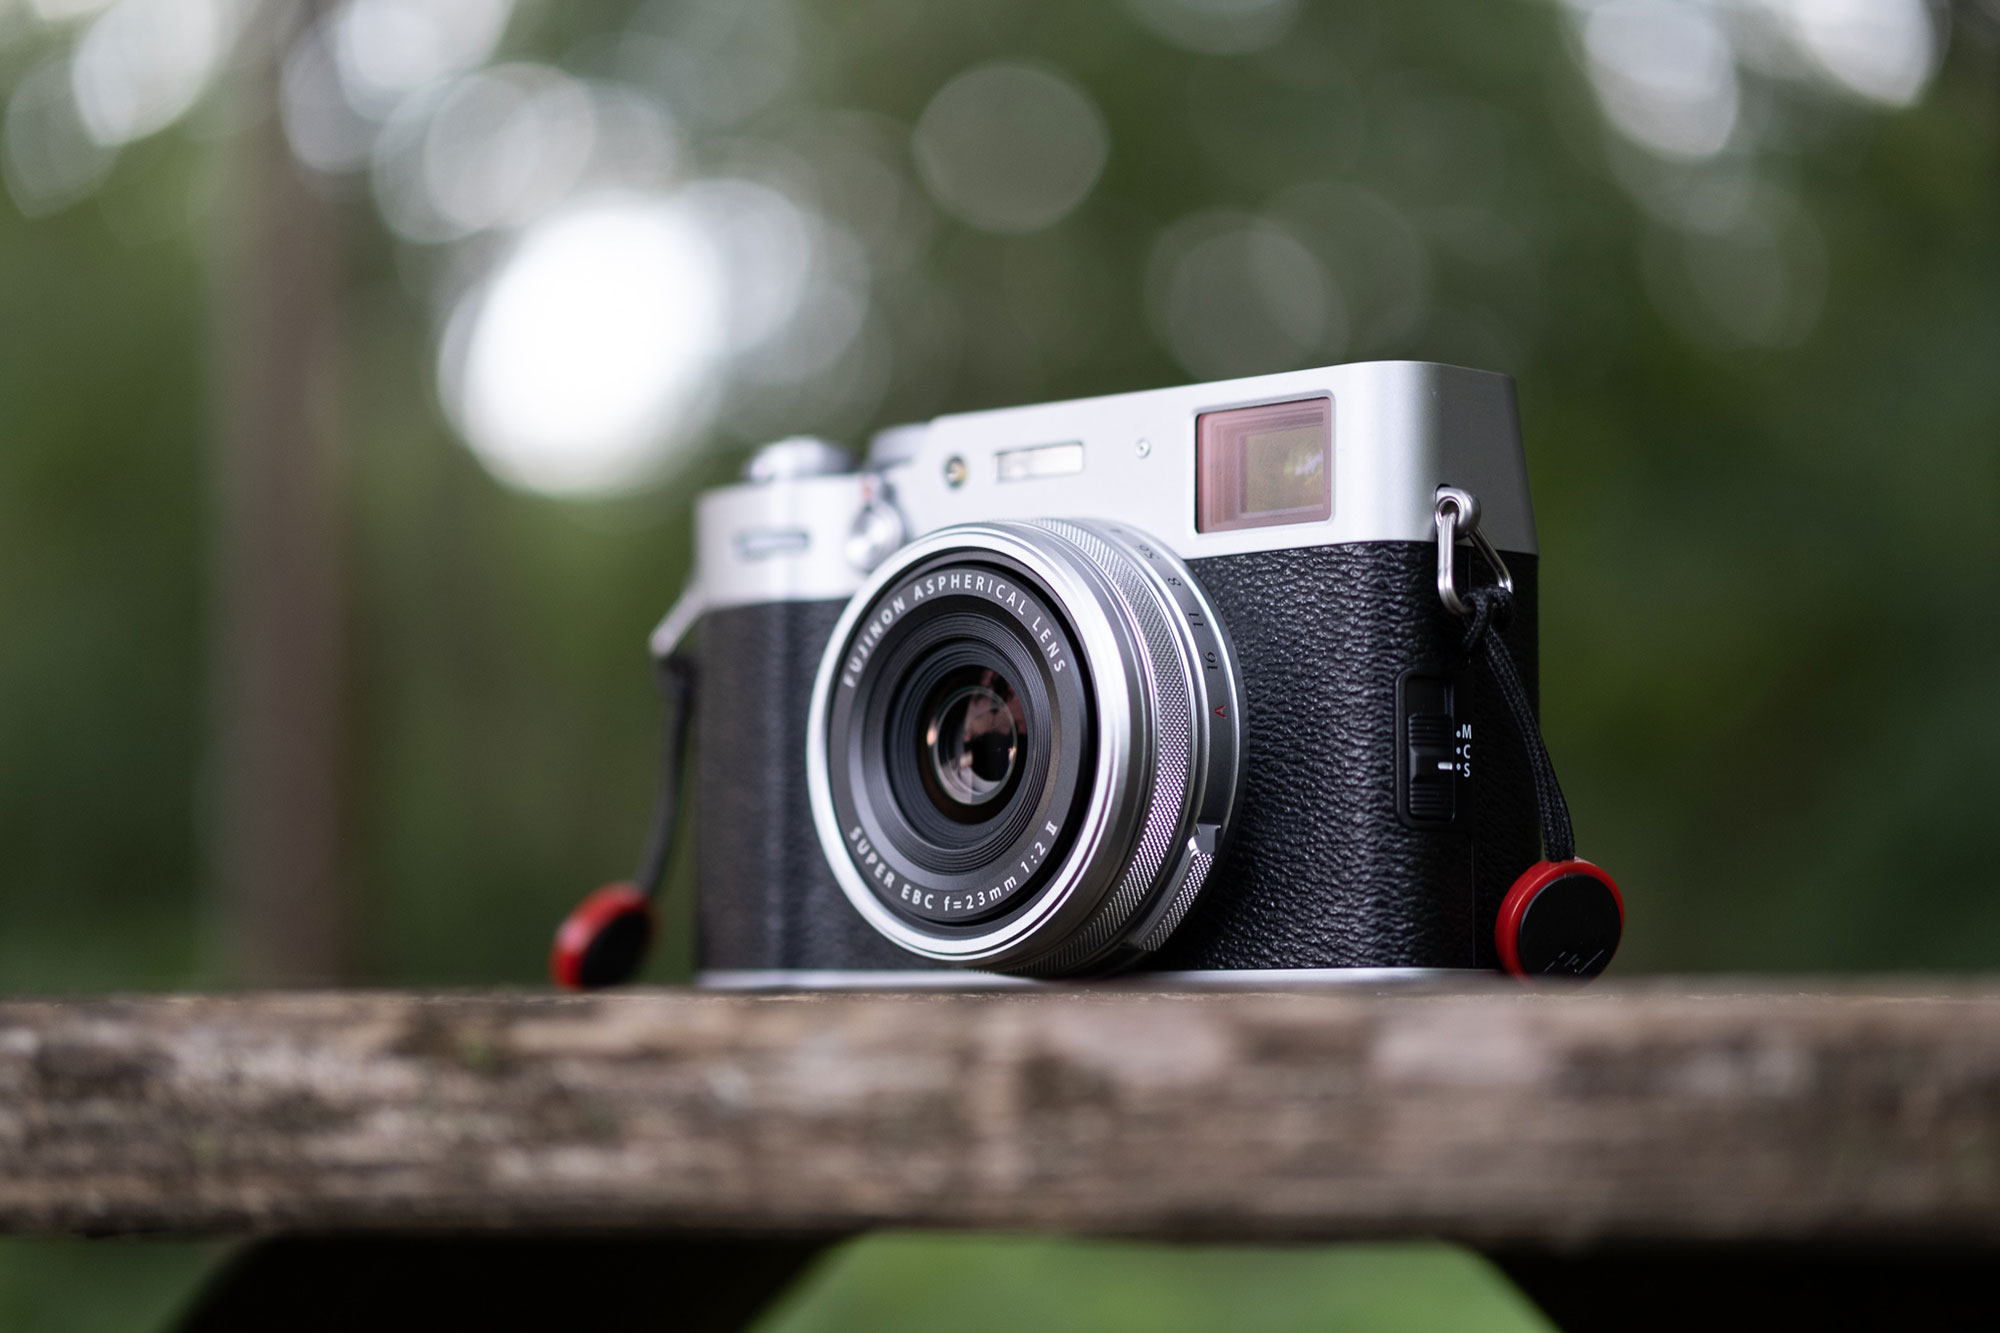 Embracing imperfection with the Fujifilm X100V: A photo walk at Dusk